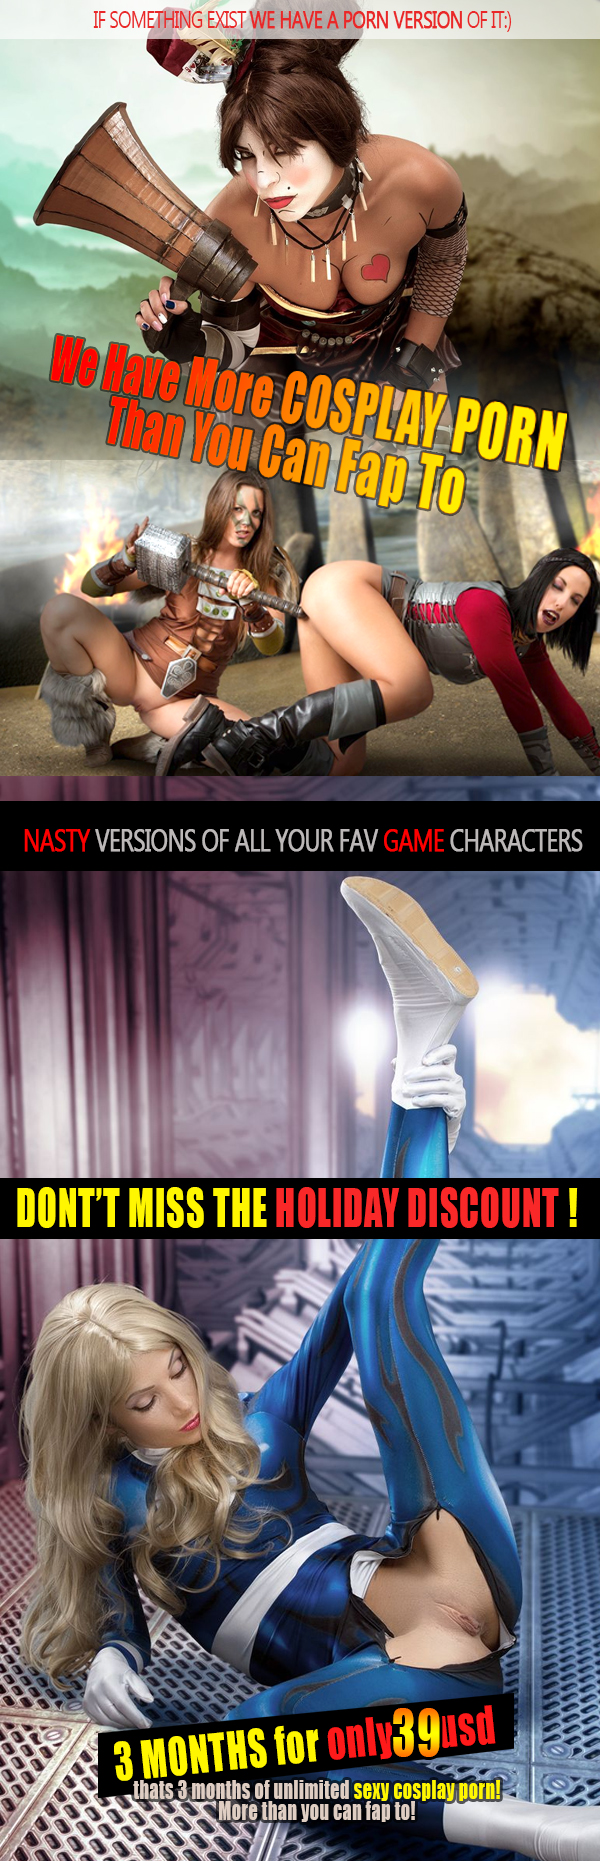 Cosplay Erotica Special Offer